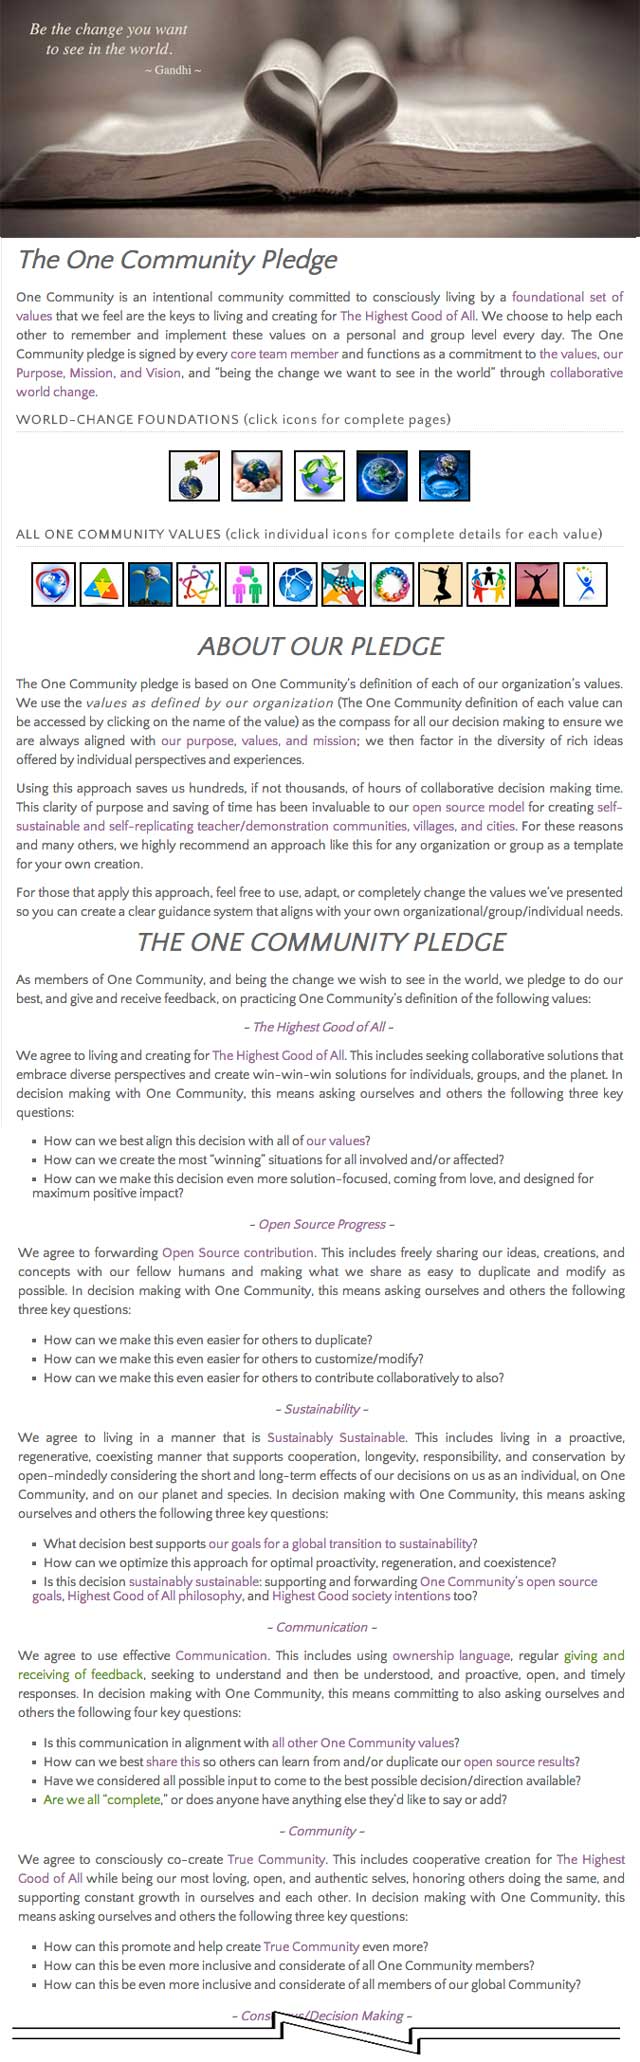 One Community Pledge, Adaptable Solutions for Society